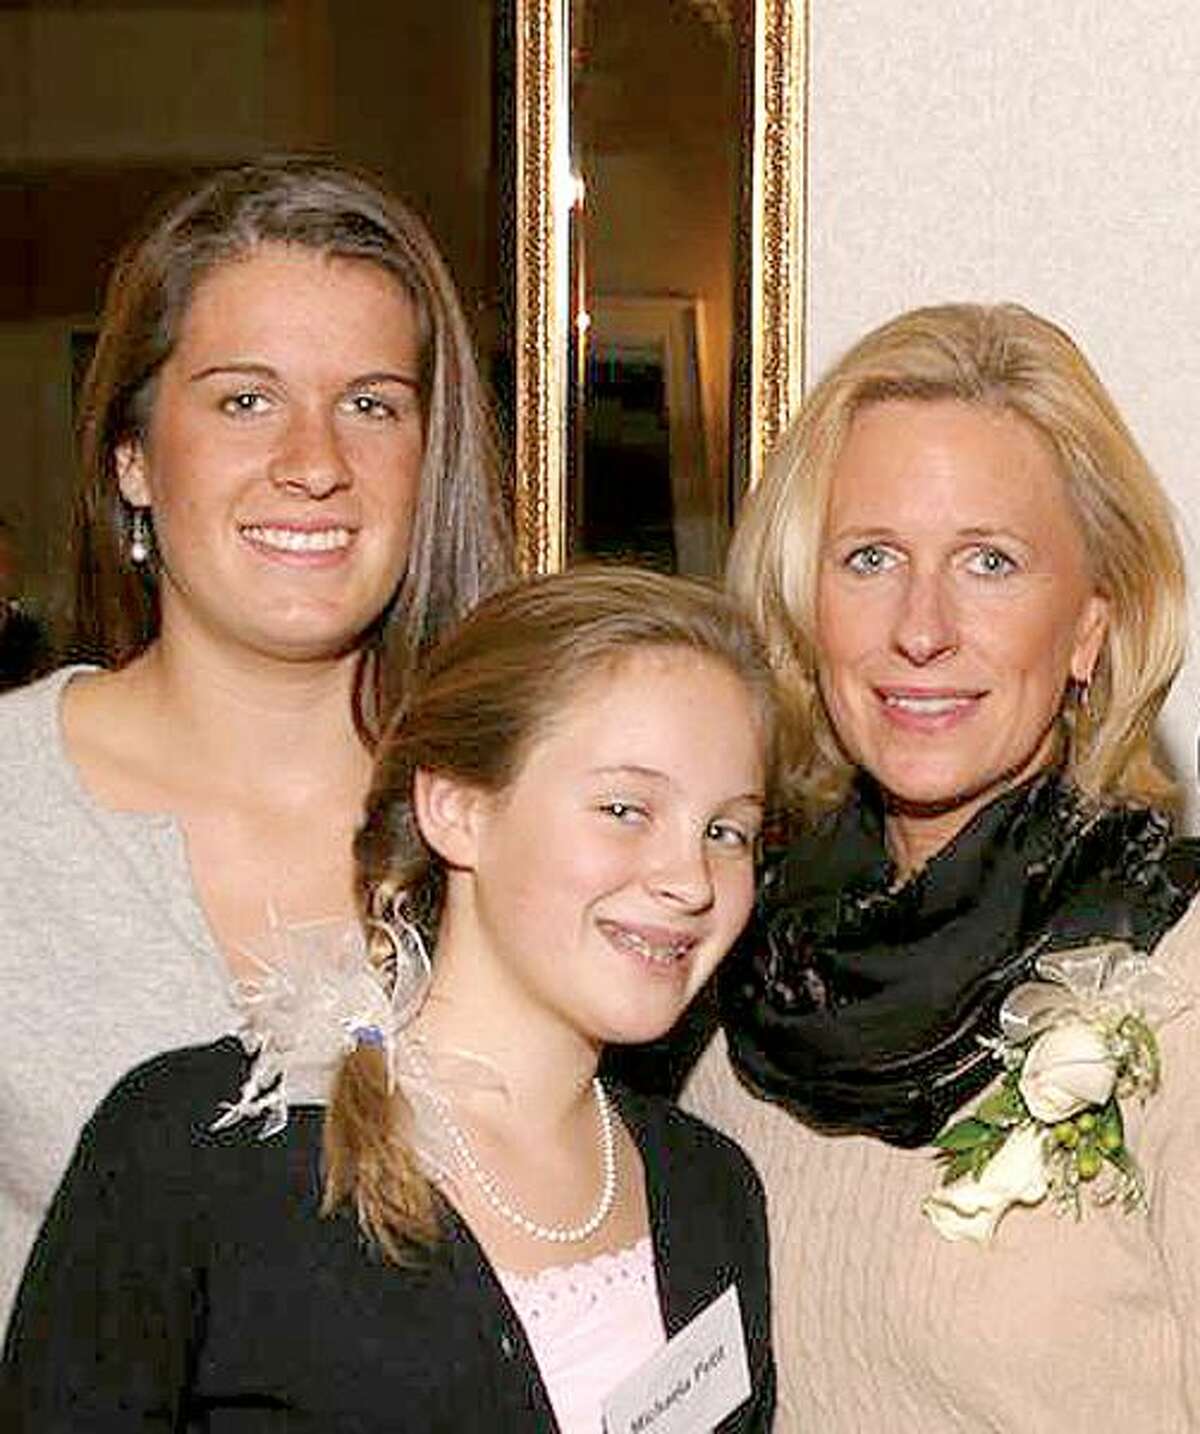 17-year-old Hayley, 11-year-old Michaela and Jennifer Hawke-Petit in an undated family photo.